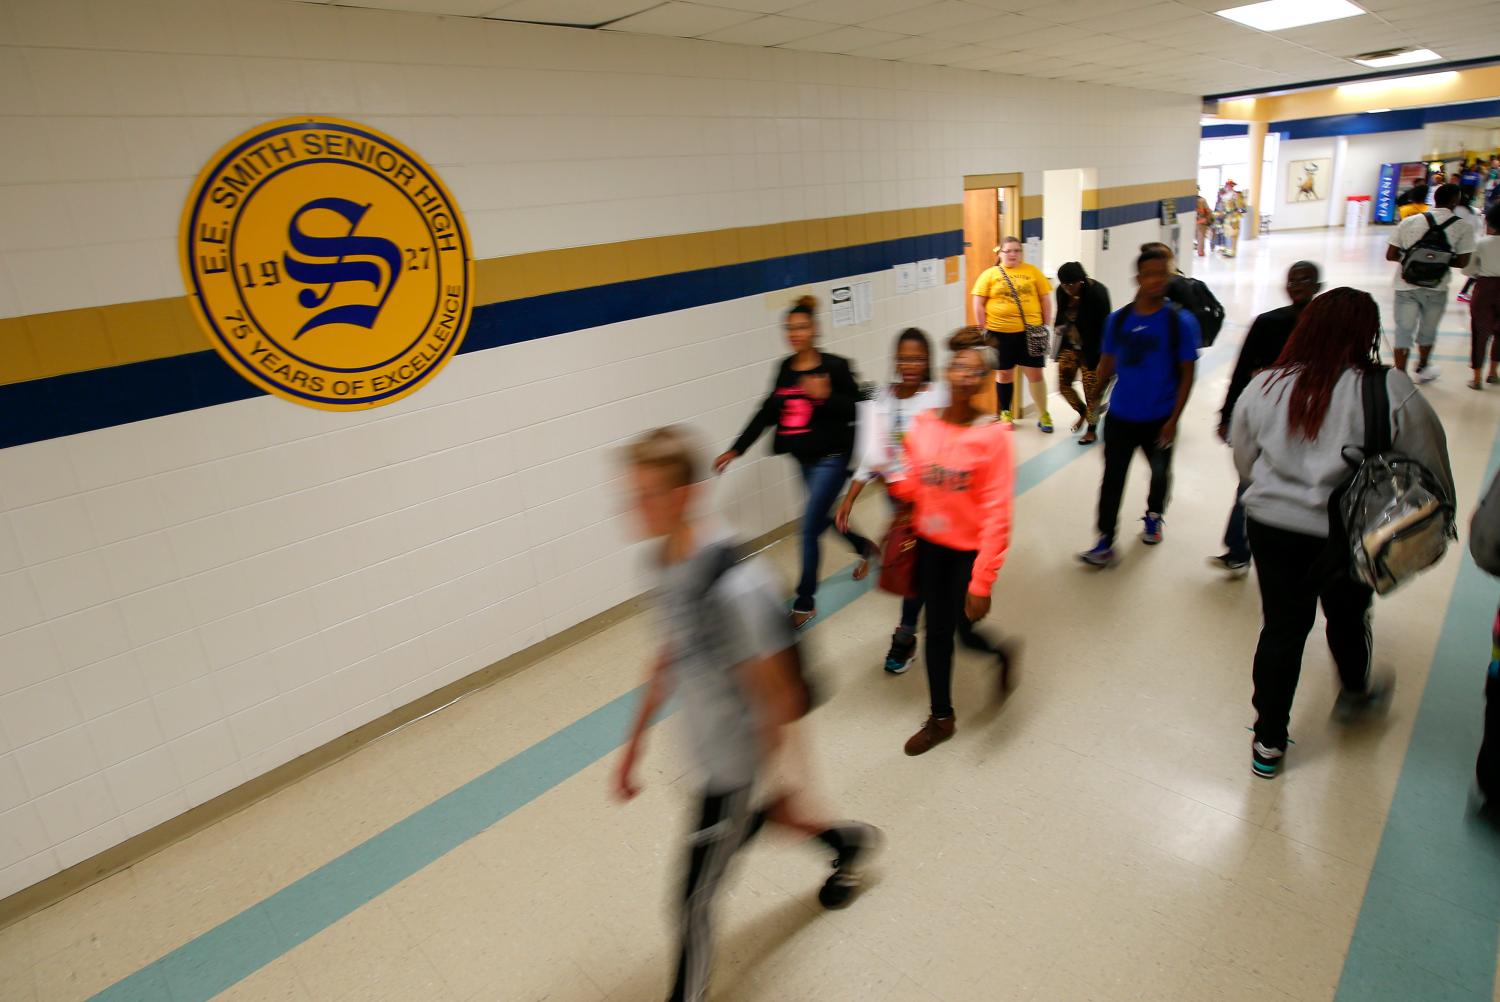 Students walk through the hallway during a class change at E.E. Smith High School.